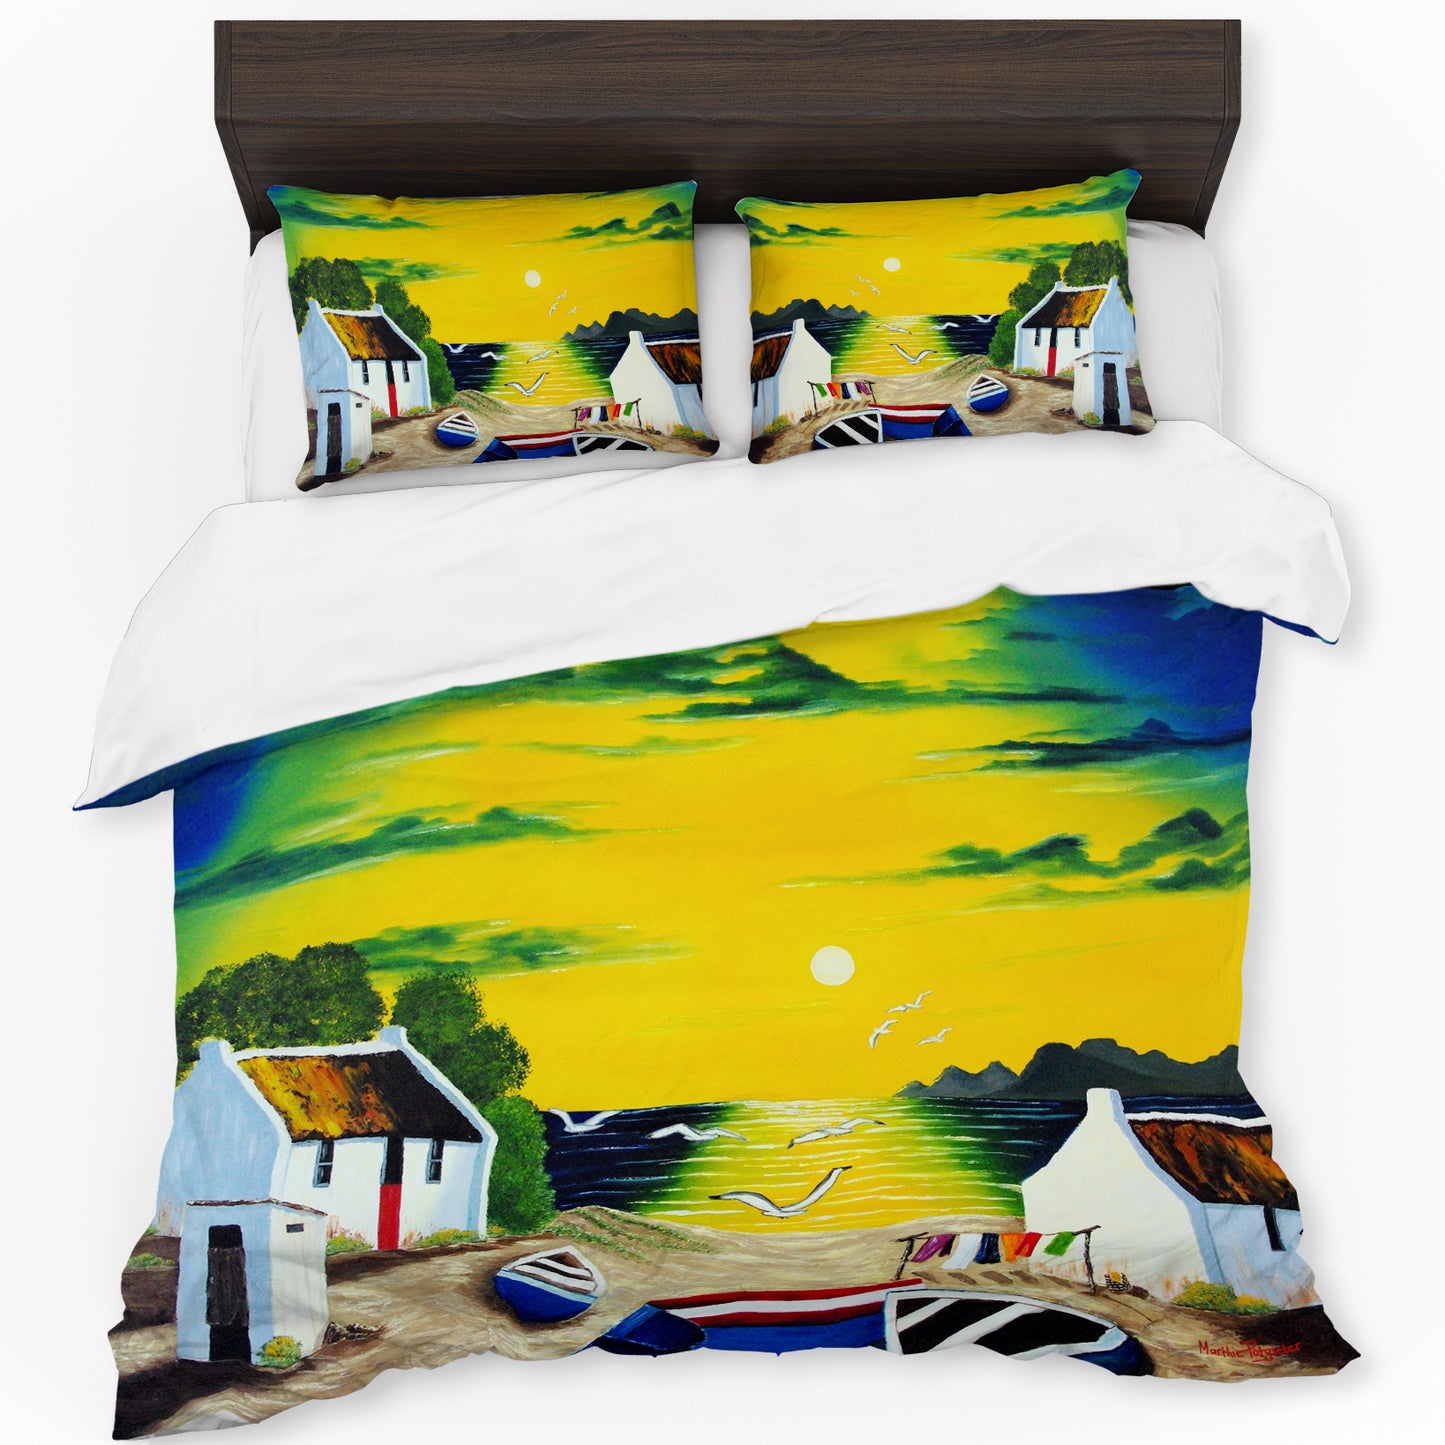 Green and Yellow Sunrise By Marthie Potgieter Duvet Cover Set